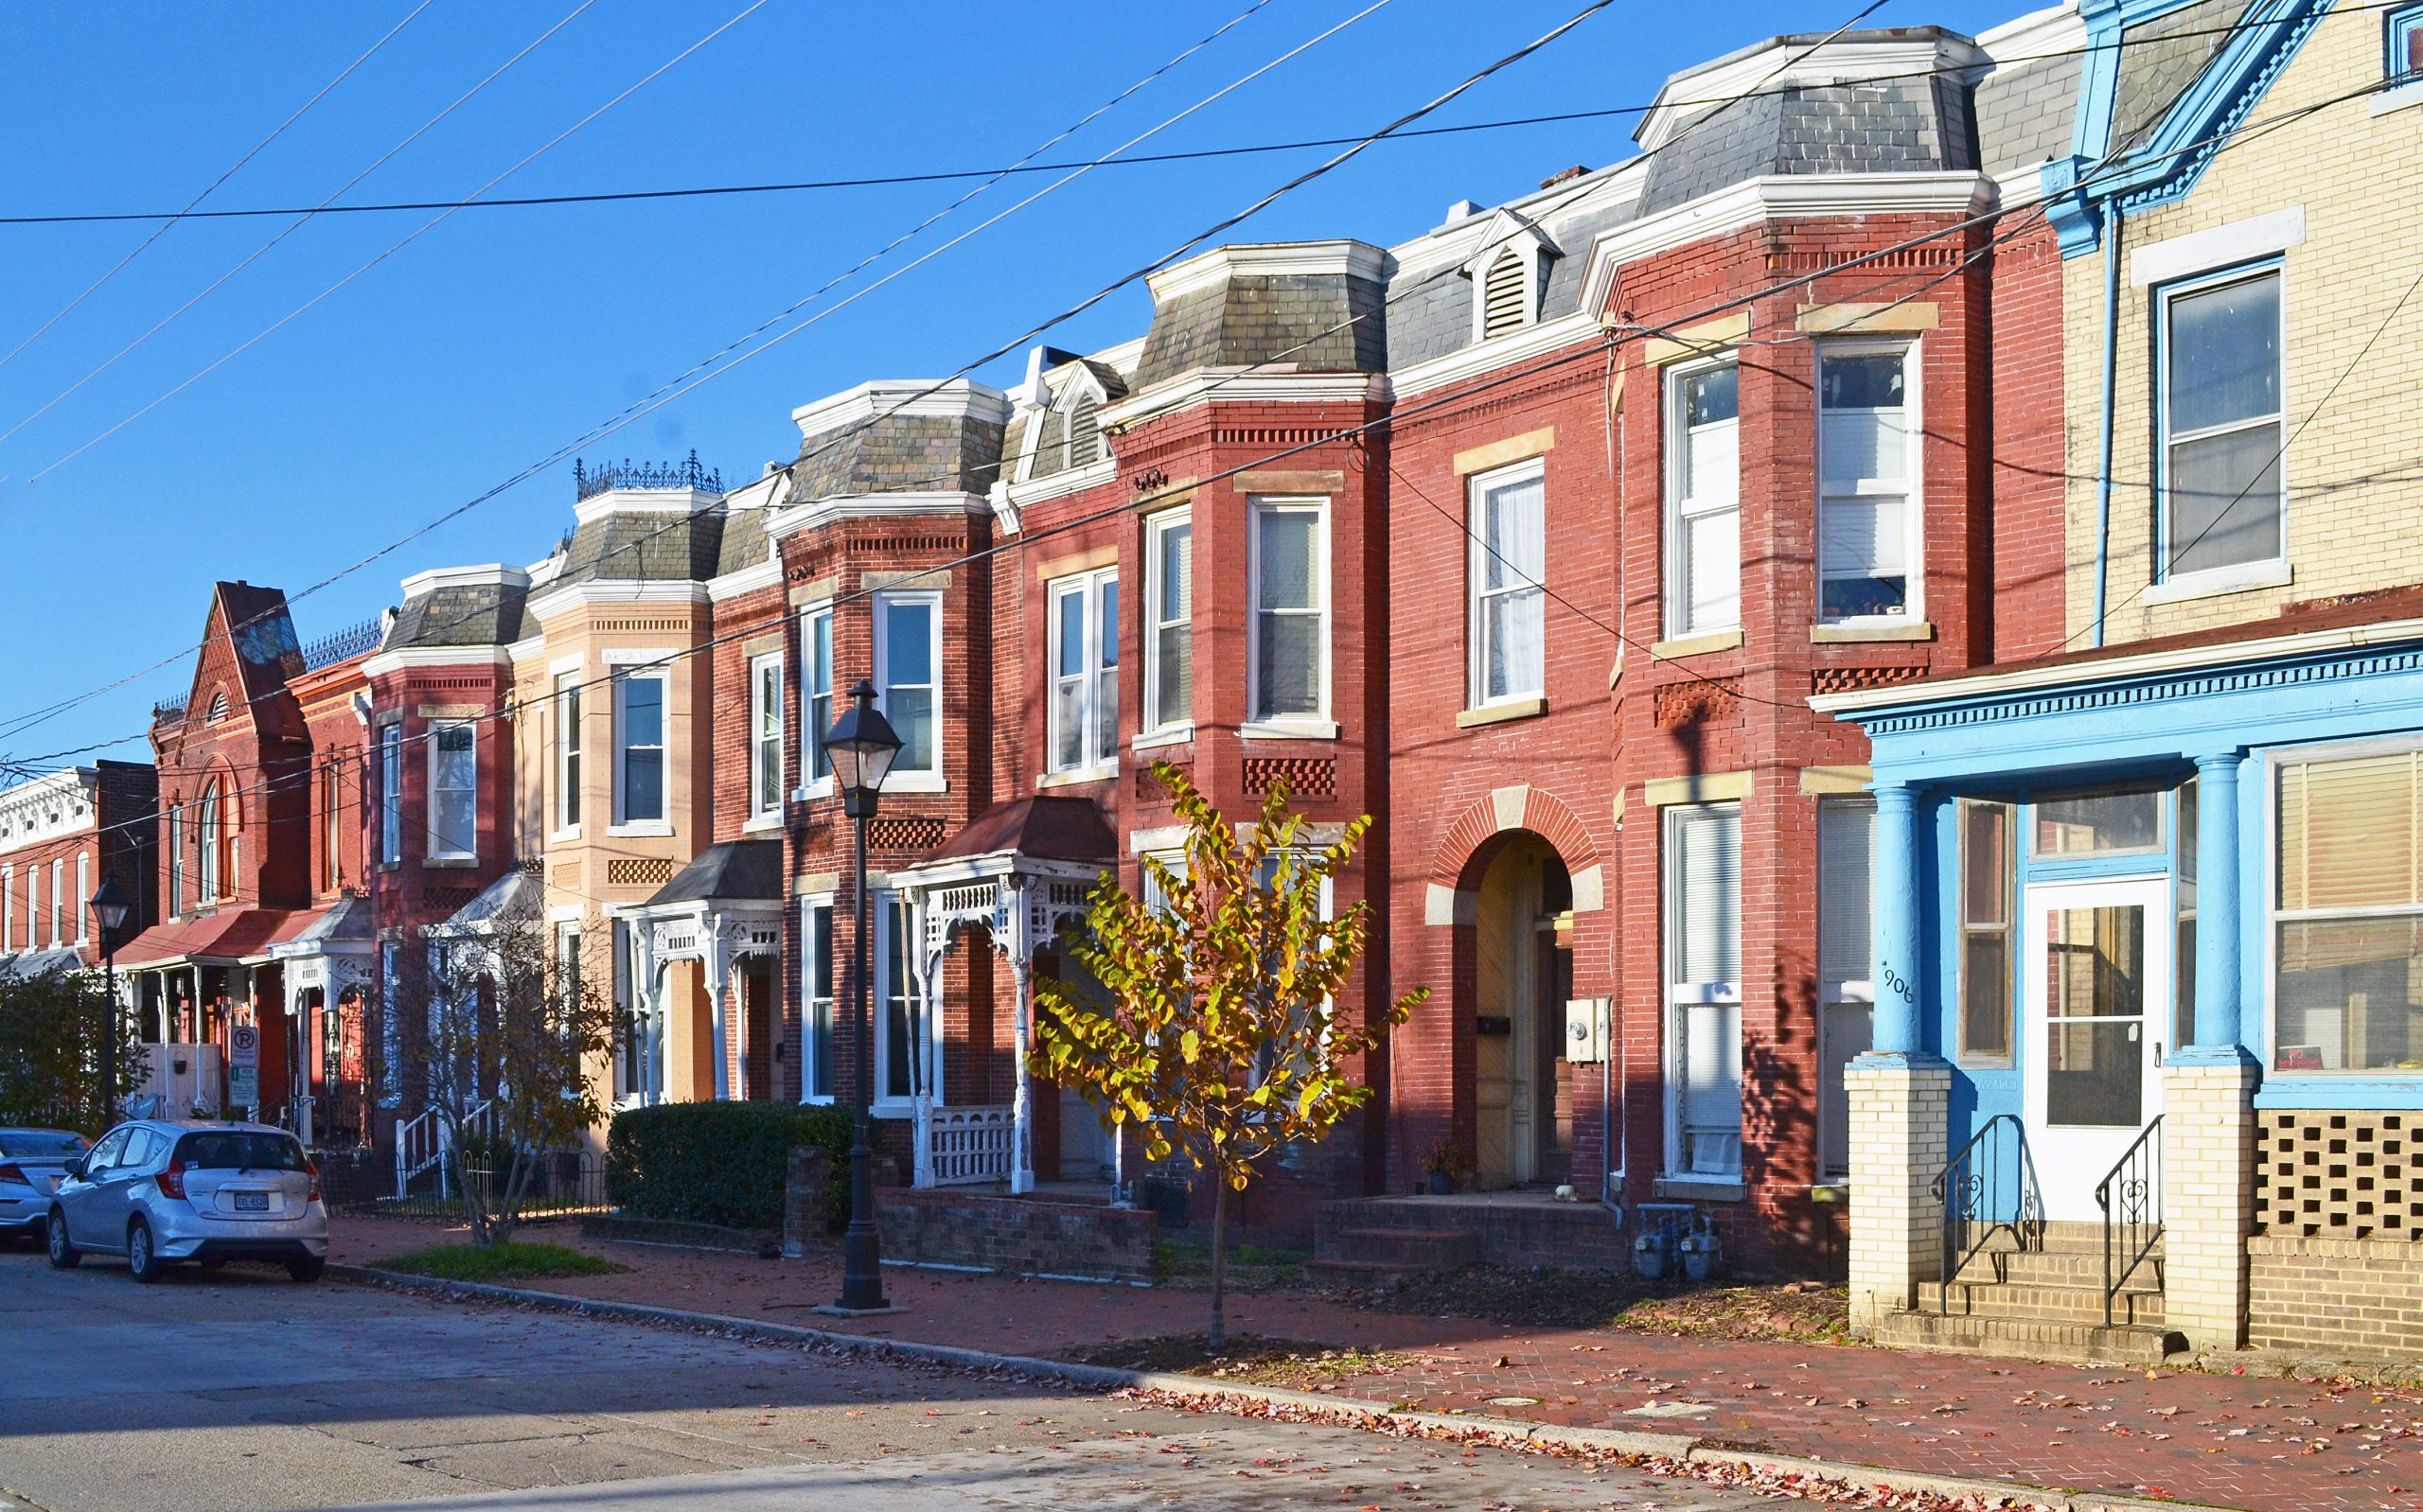 Carver Residential Historic District